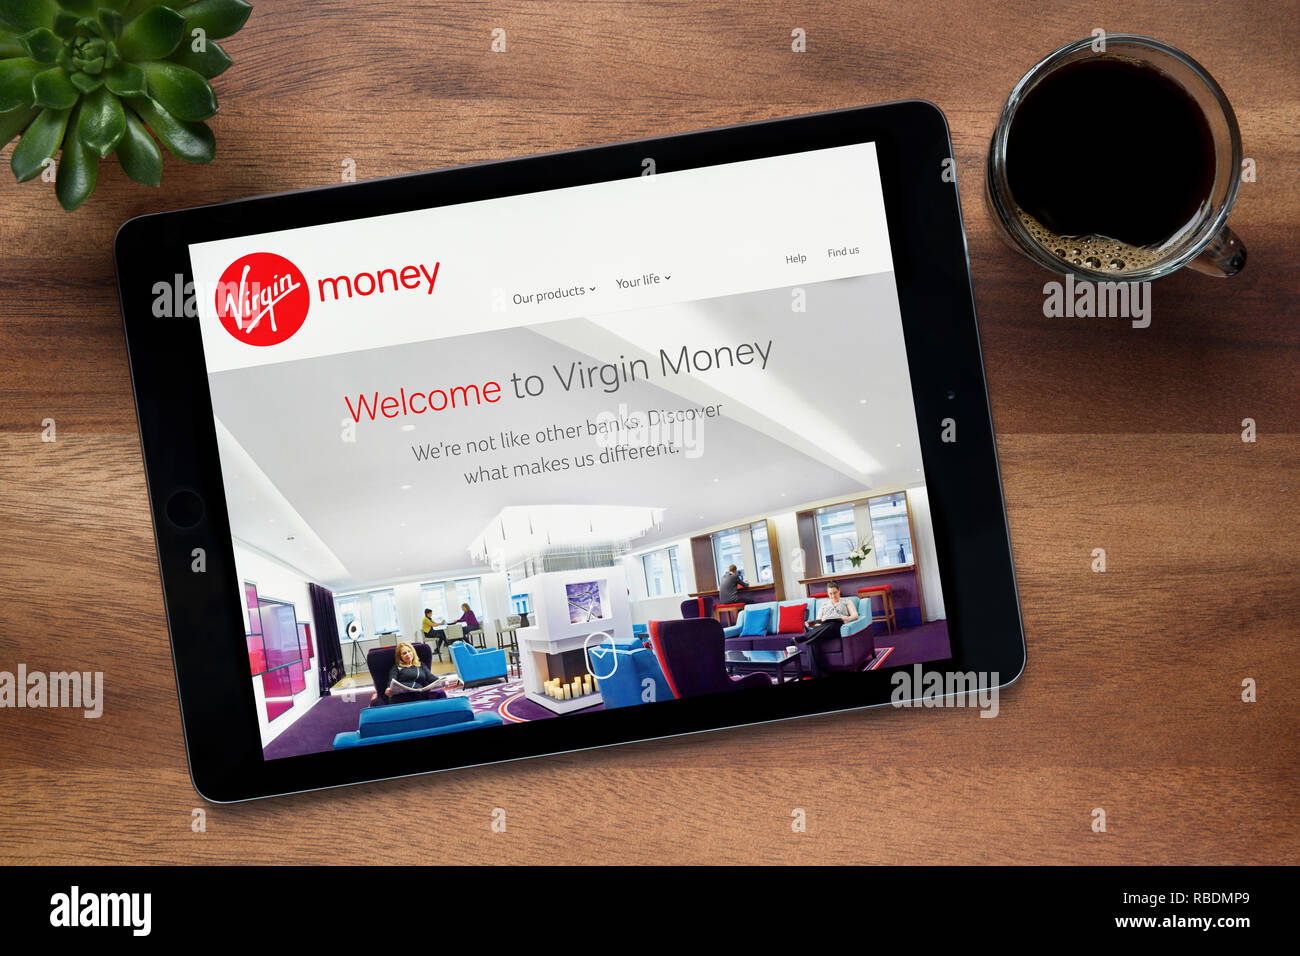 The website of Virgin Money is seen on an iPad tablet, on a wooden table along with an espresso coffee and a house plant (Editorial use only). Stock Photo